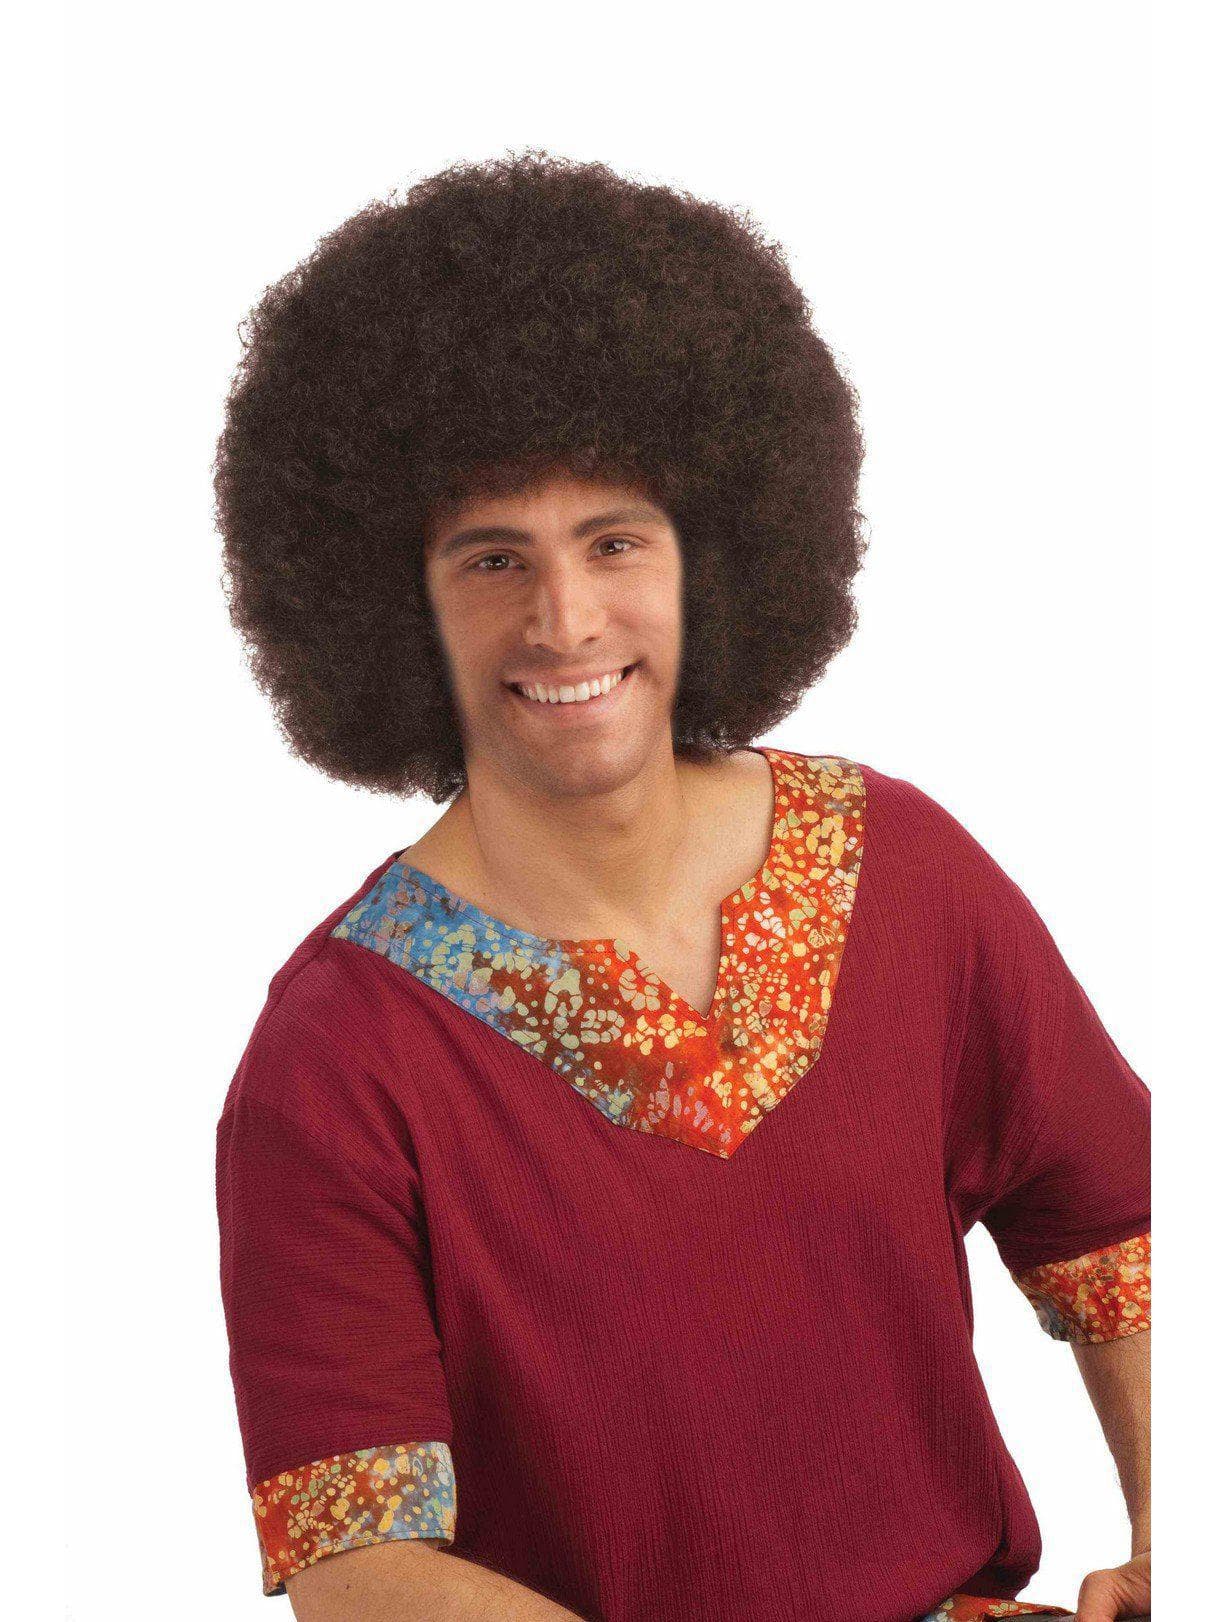 Adult Brown Afro Wig - Deluxe - costumes.com